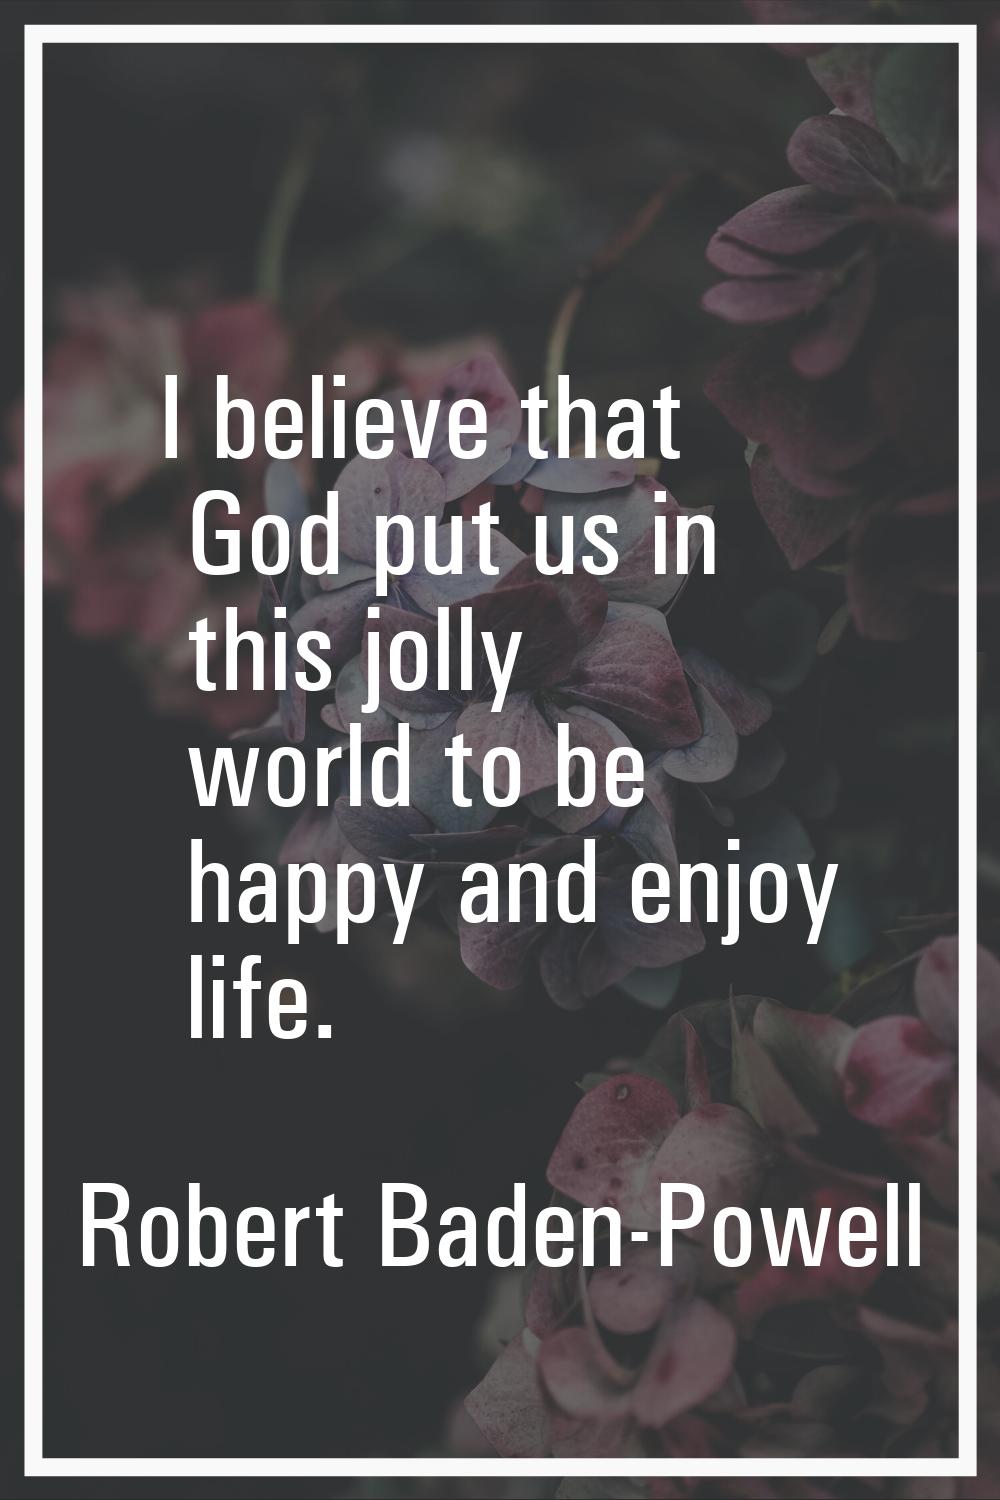 I believe that God put us in this jolly world to be happy and enjoy life.